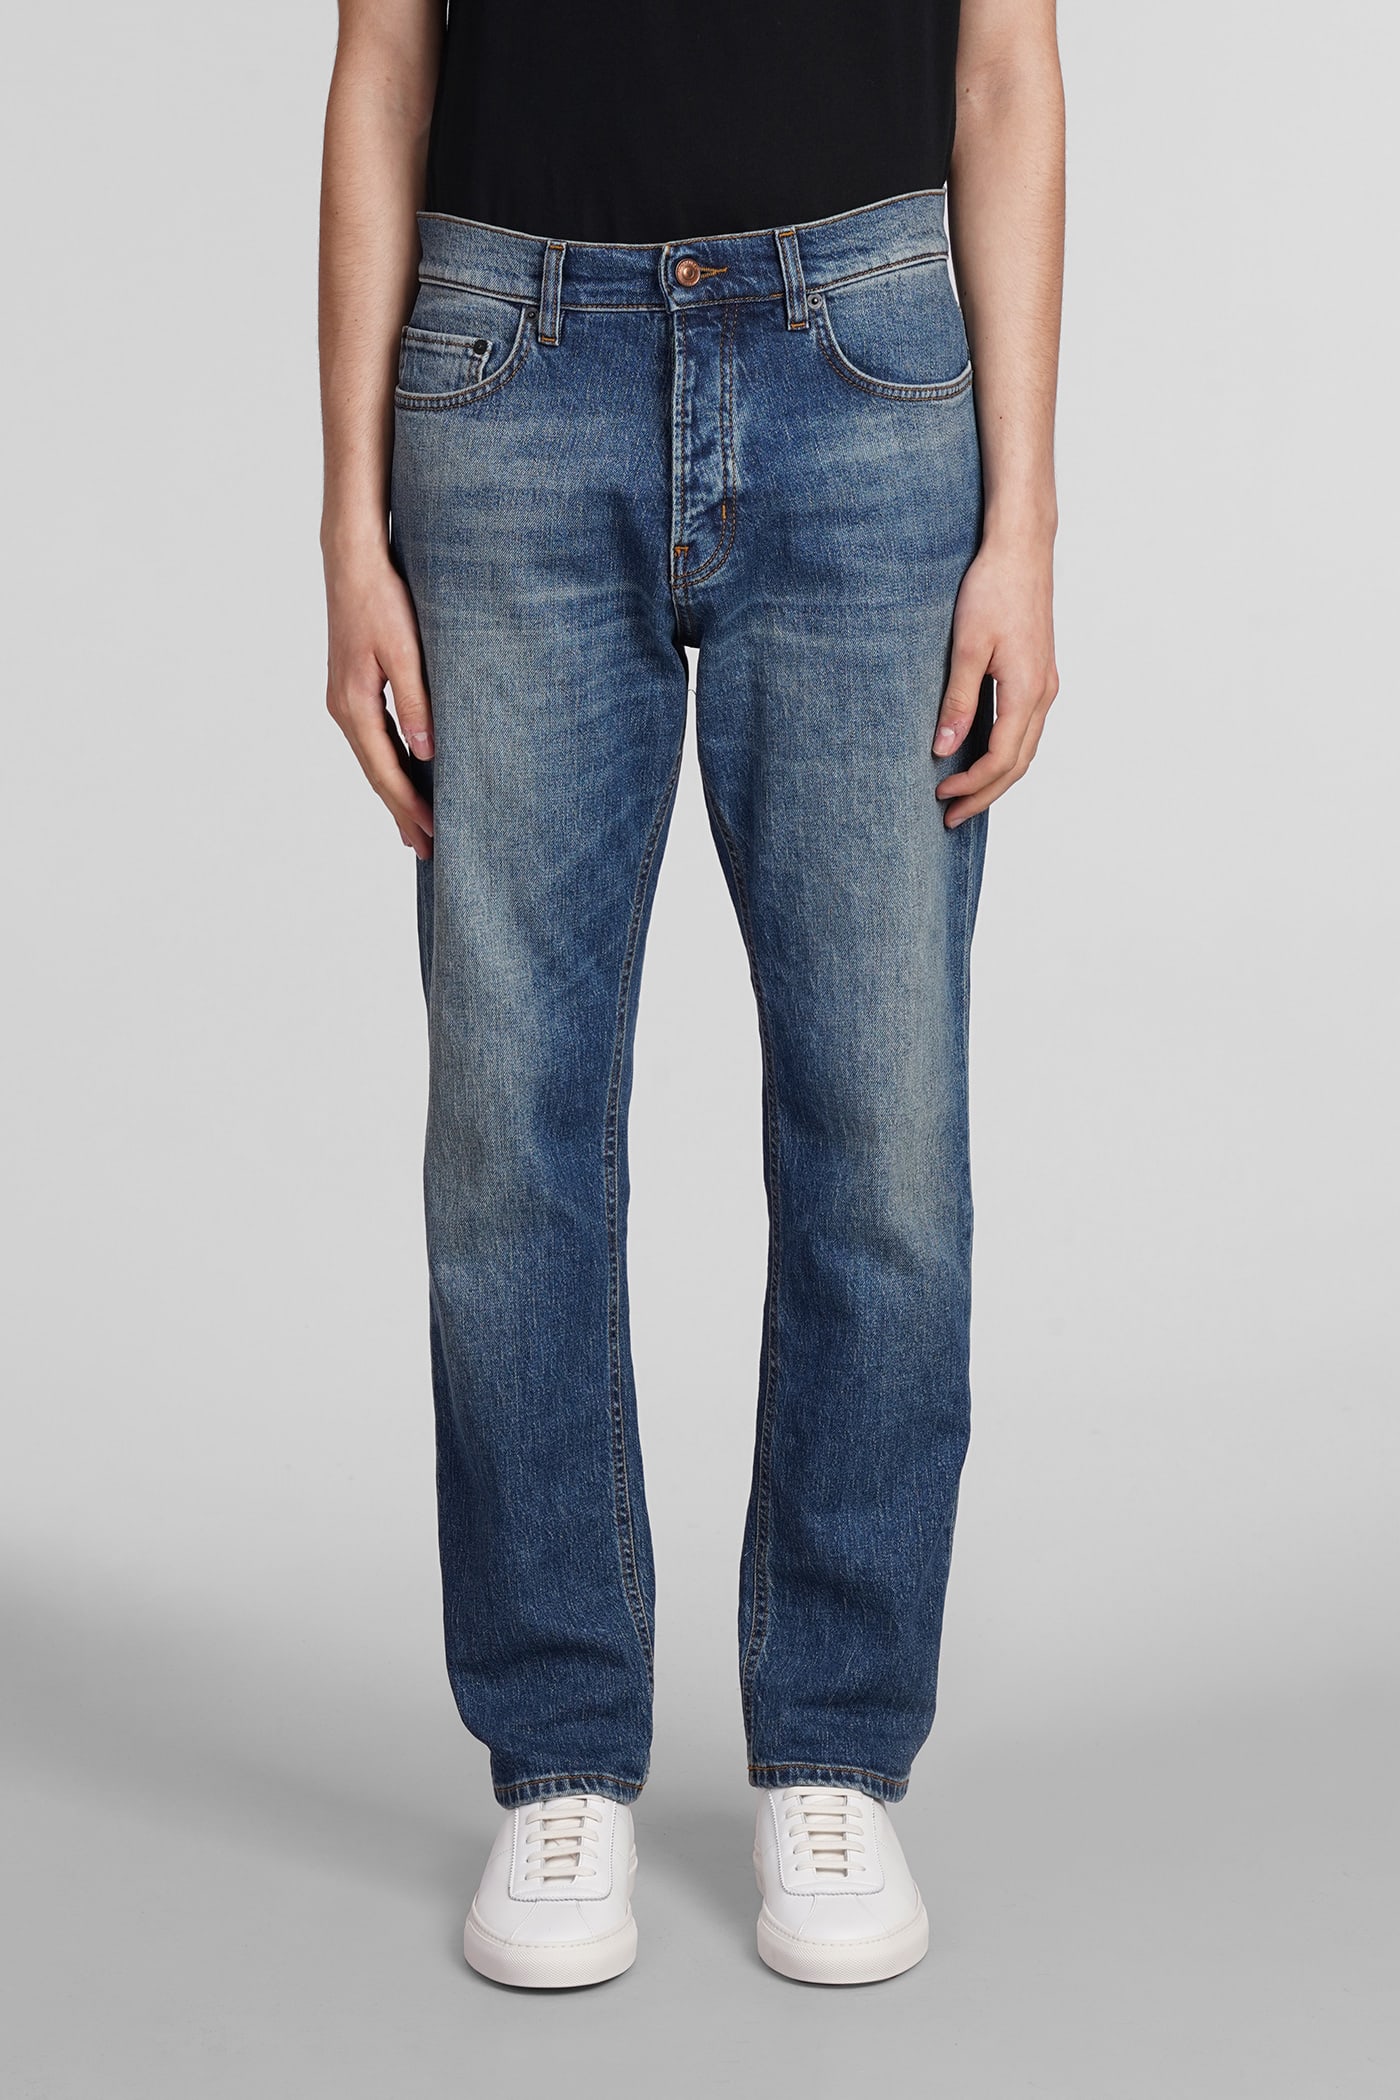 Tokyo Jeans In Blue Cotton